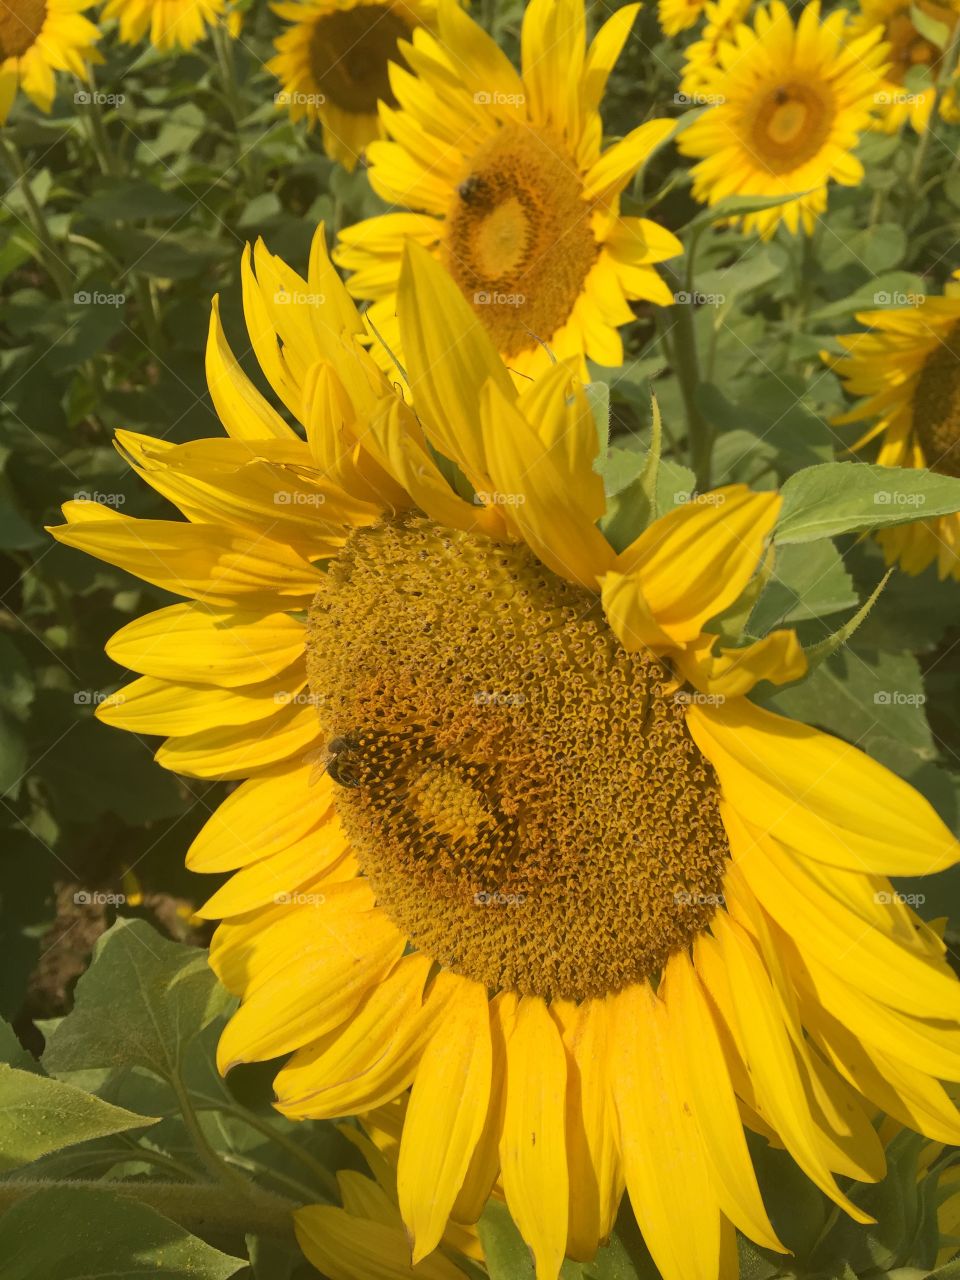 Sunflowers and bees